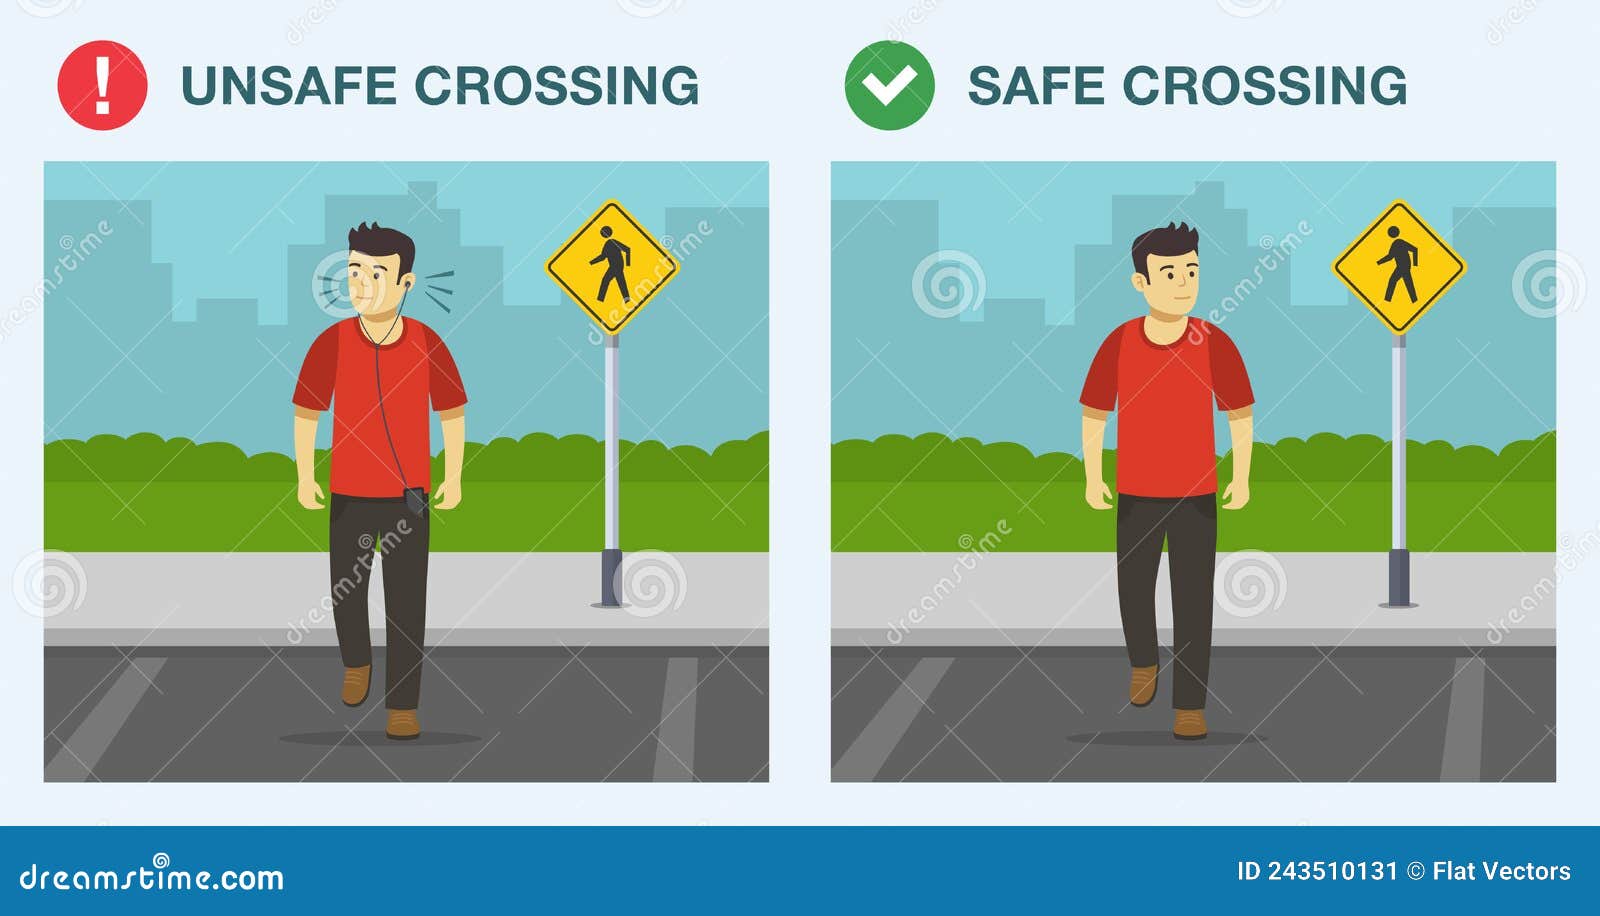 Pedestrian Safety Rules And Tips. Safe And Unsafe Street Crossing ...